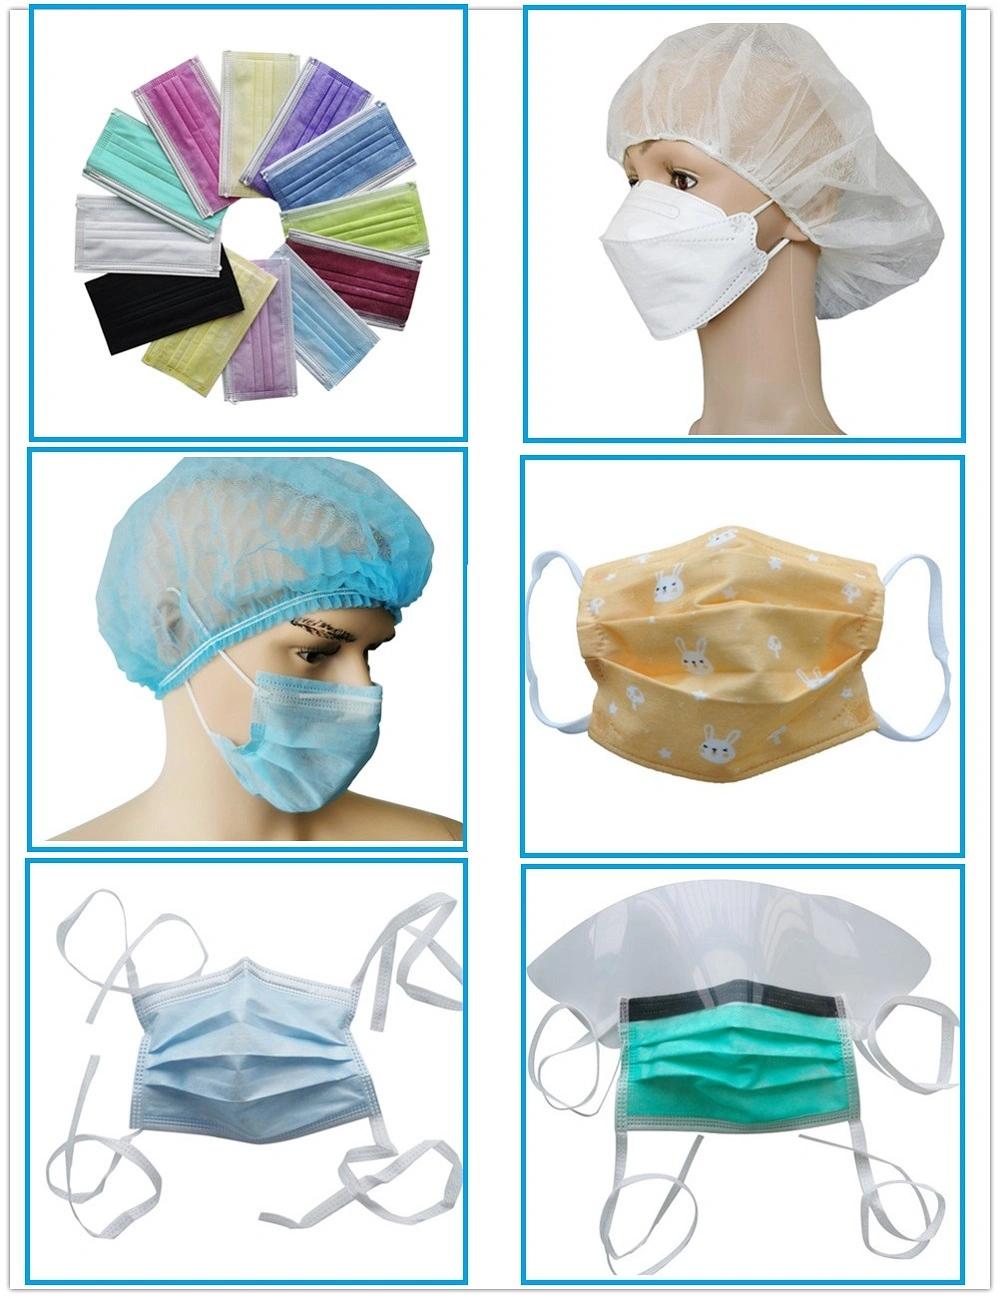 50 Per Box Protective Three-Layer Hospital General Patient Care and Isolation Disposable Horizontal Ties Surgical Facial Filtering Mask Tie on Surgical Mask